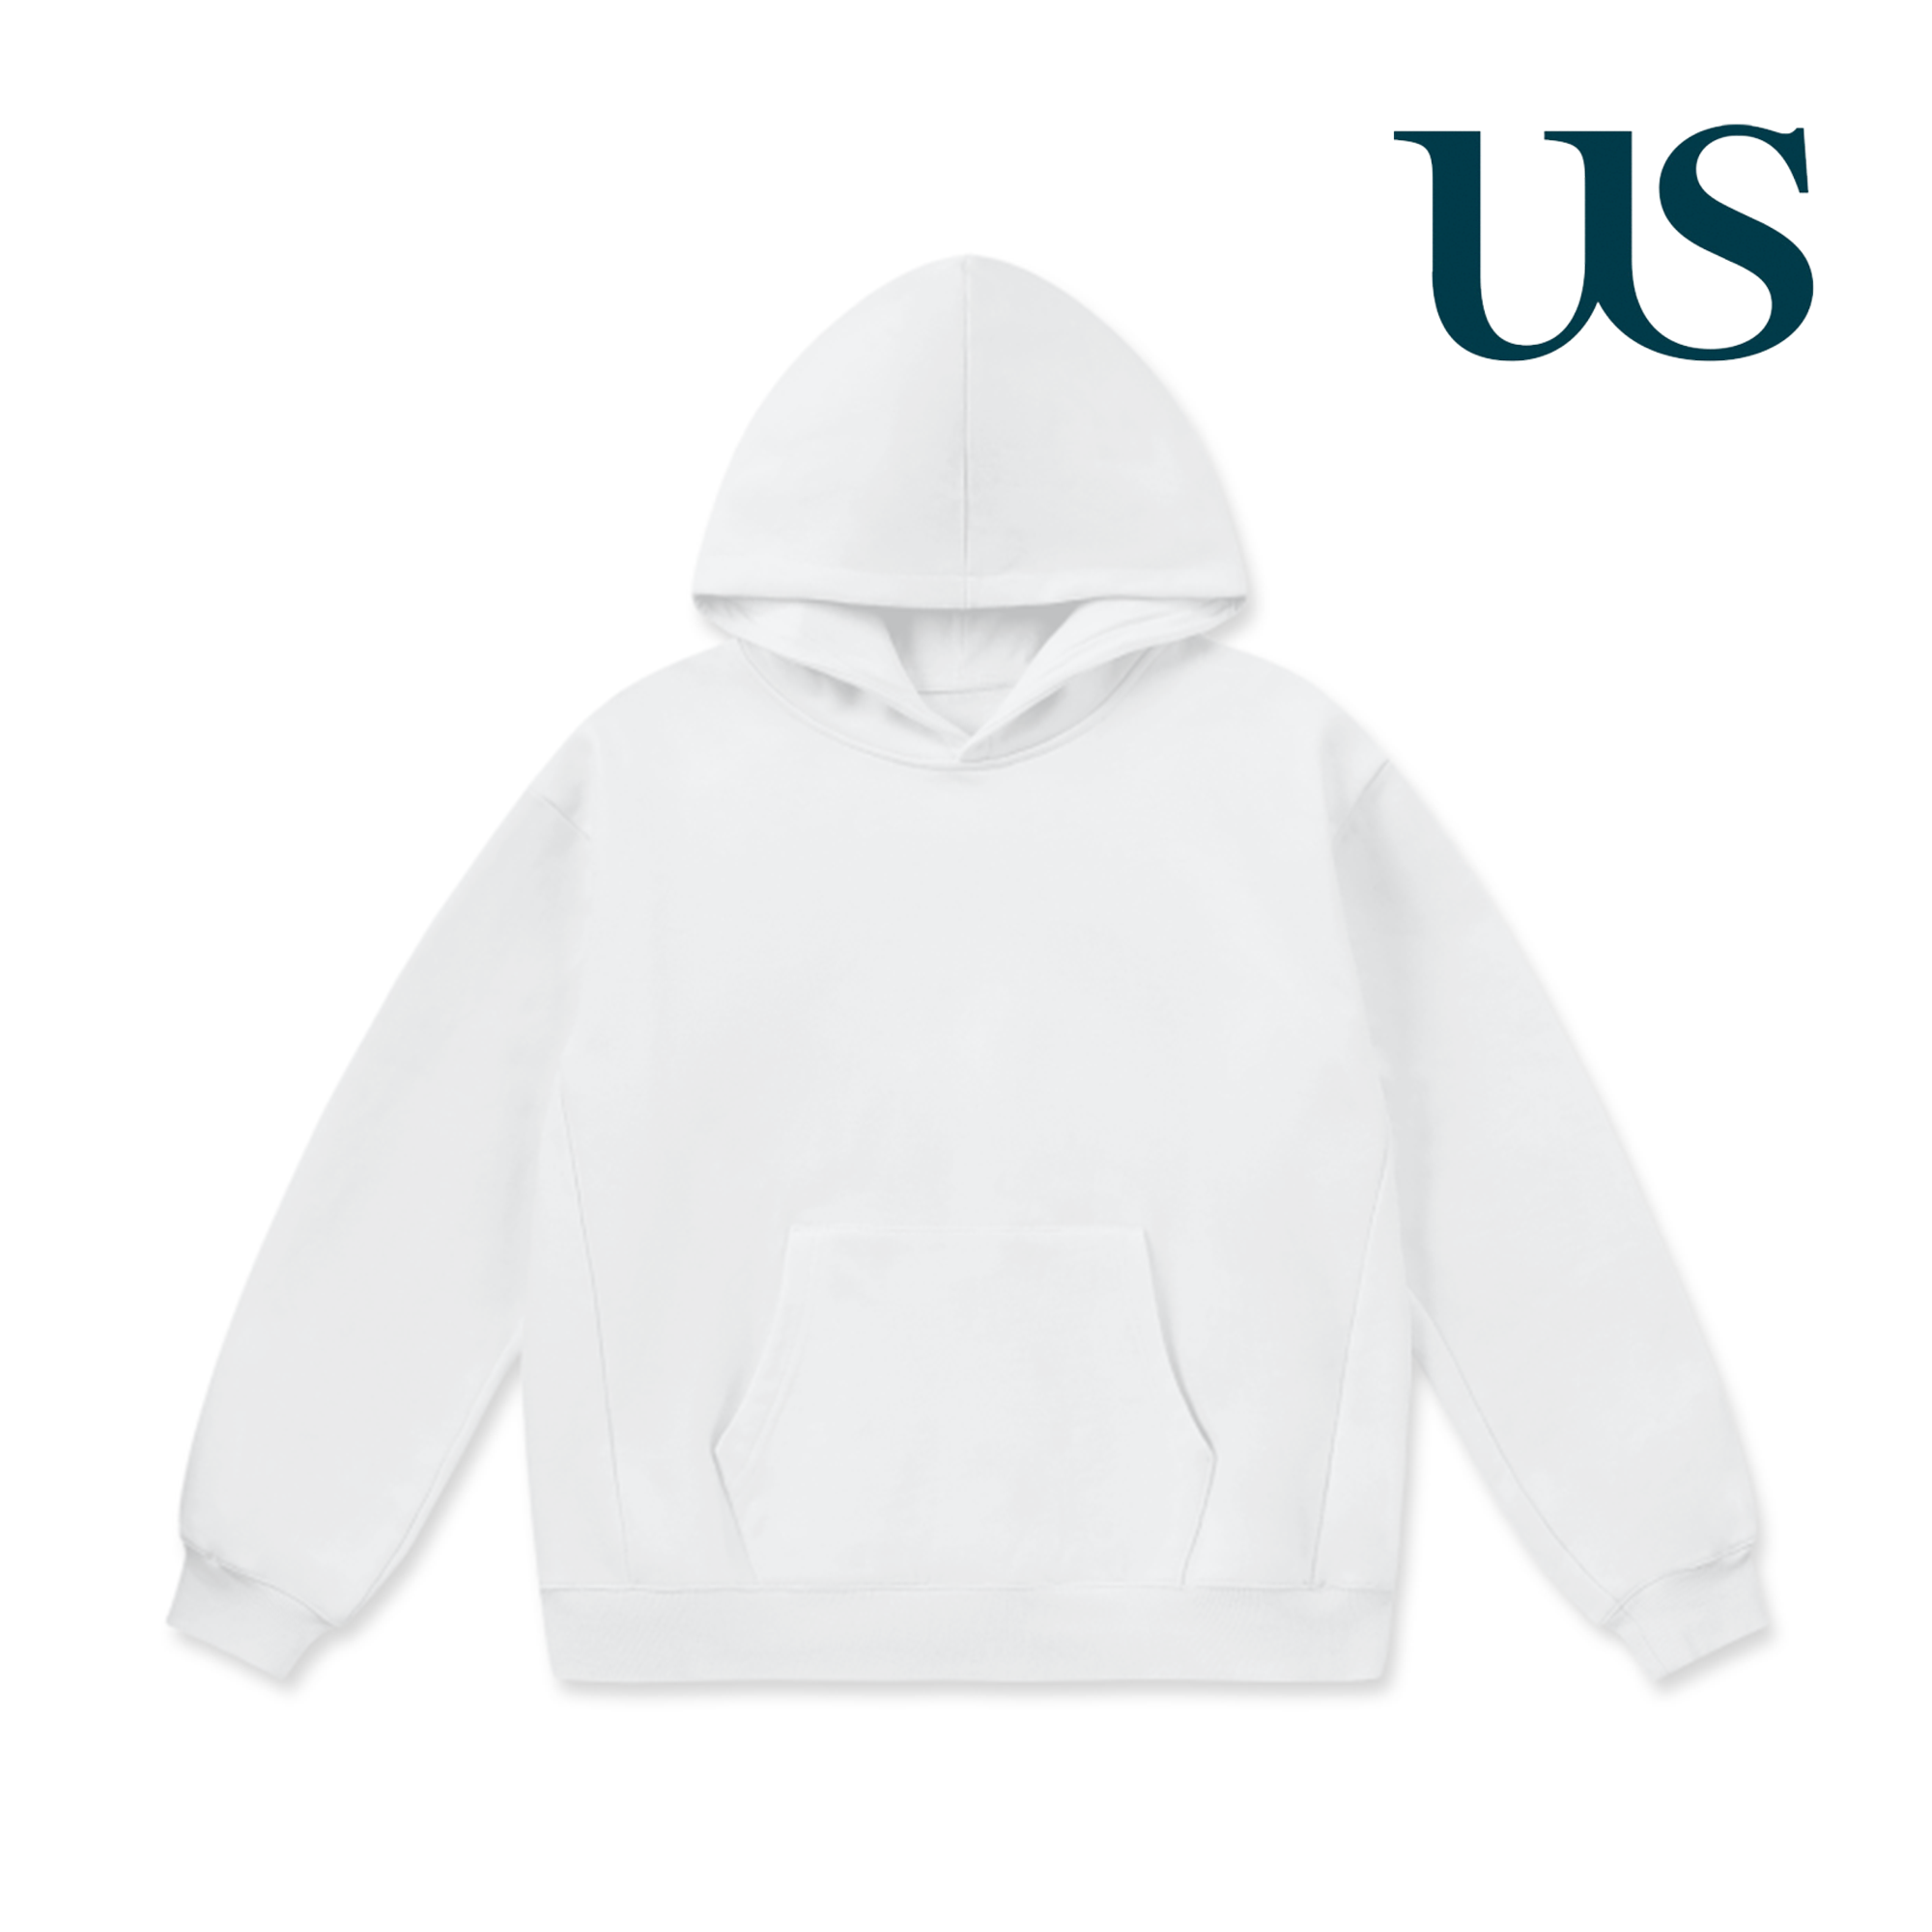 LCC Super Weighted Hoodie - University of Sussex (Classic)